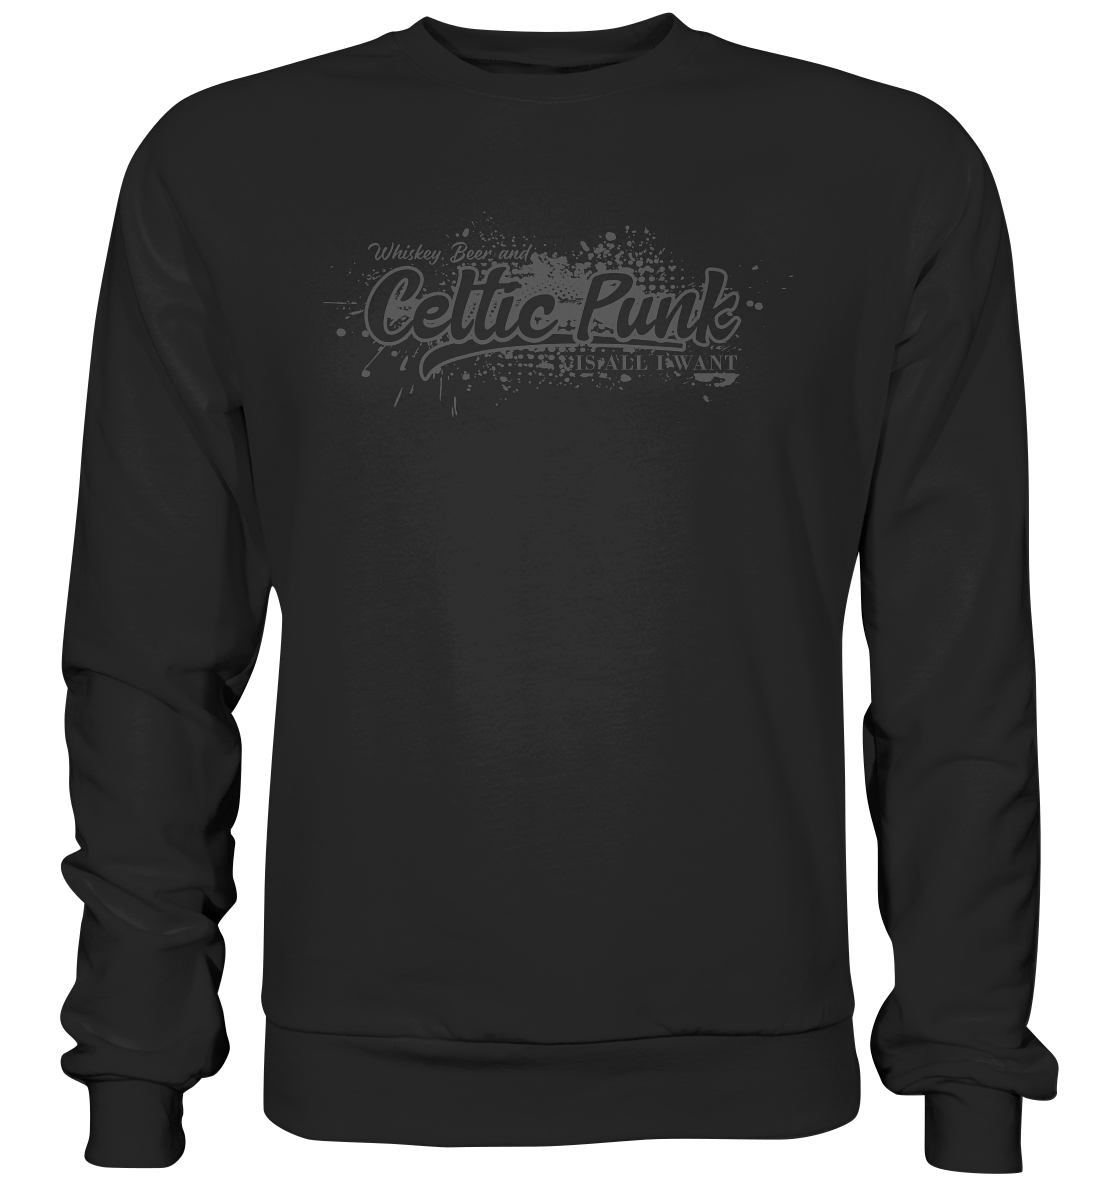 Whiskey, Beer And Celtic Punk "Is All I Want" - Basic Sweatshirt